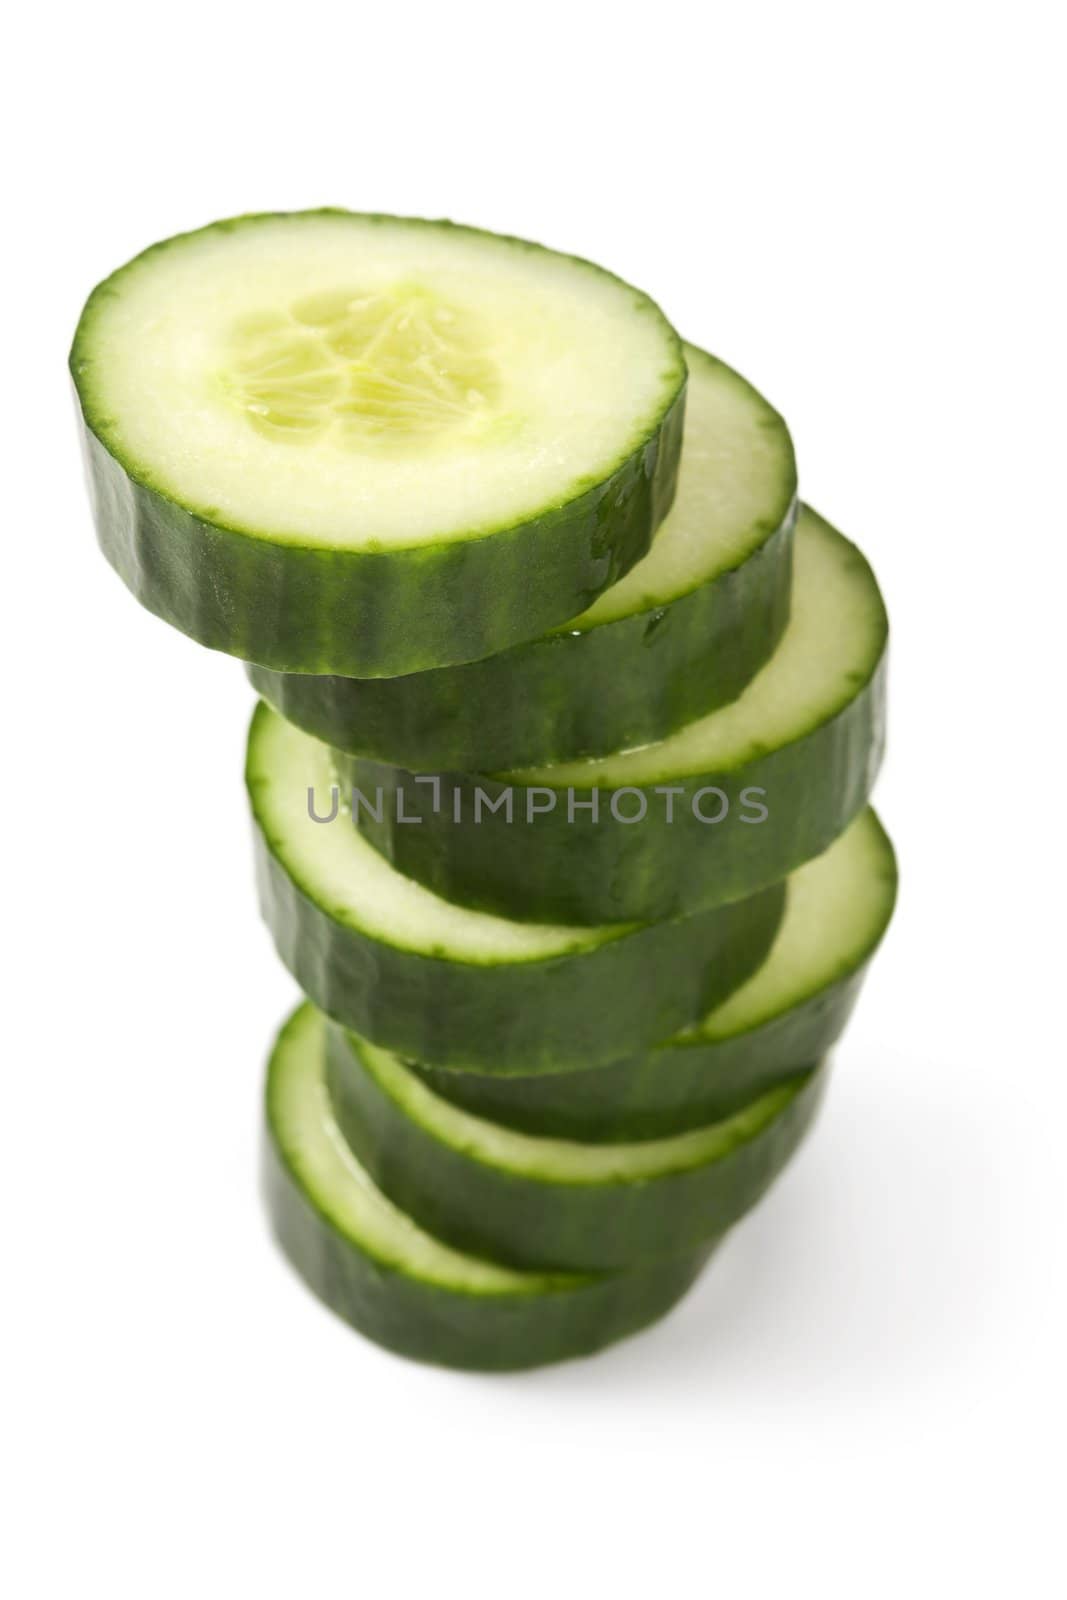 Cucumber pile by sumners